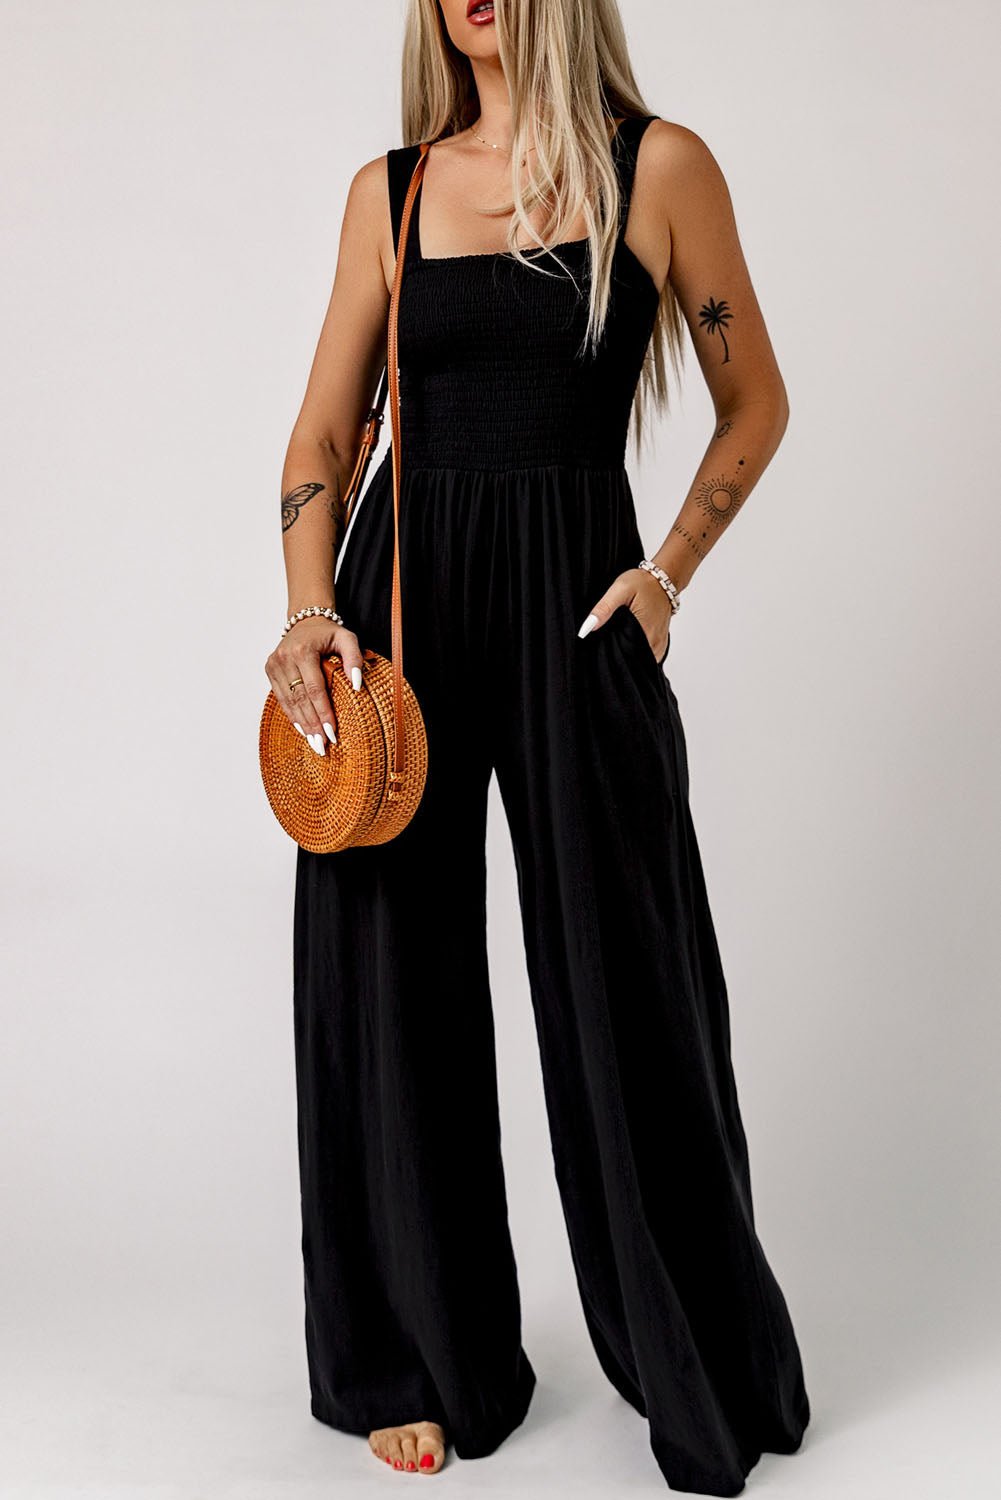 Smocked Square Neck Wide Leg Jumpsuit with Pockets - Fashion Girl Online Store